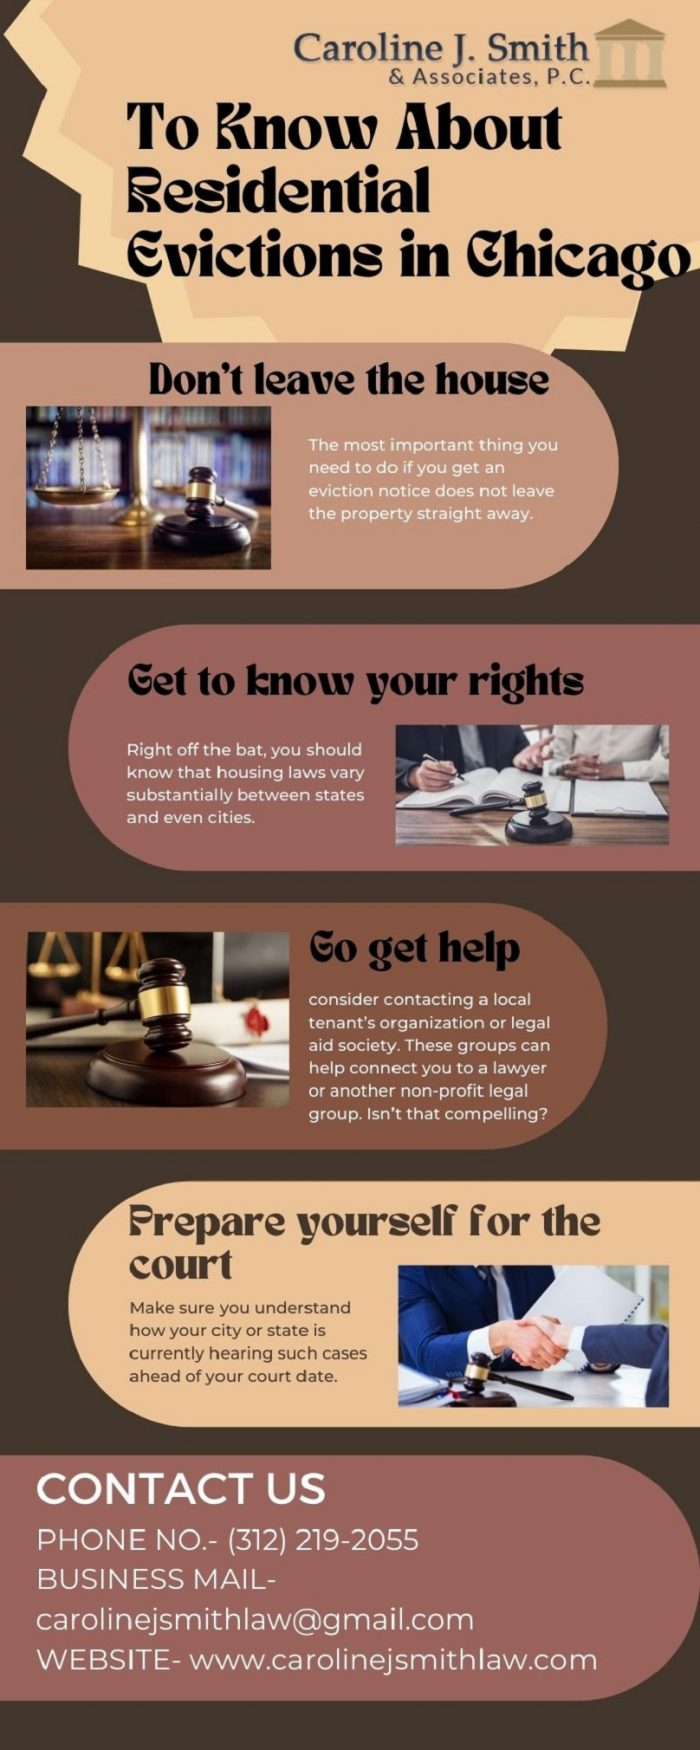 To Know About Residential Evictions in Chicago